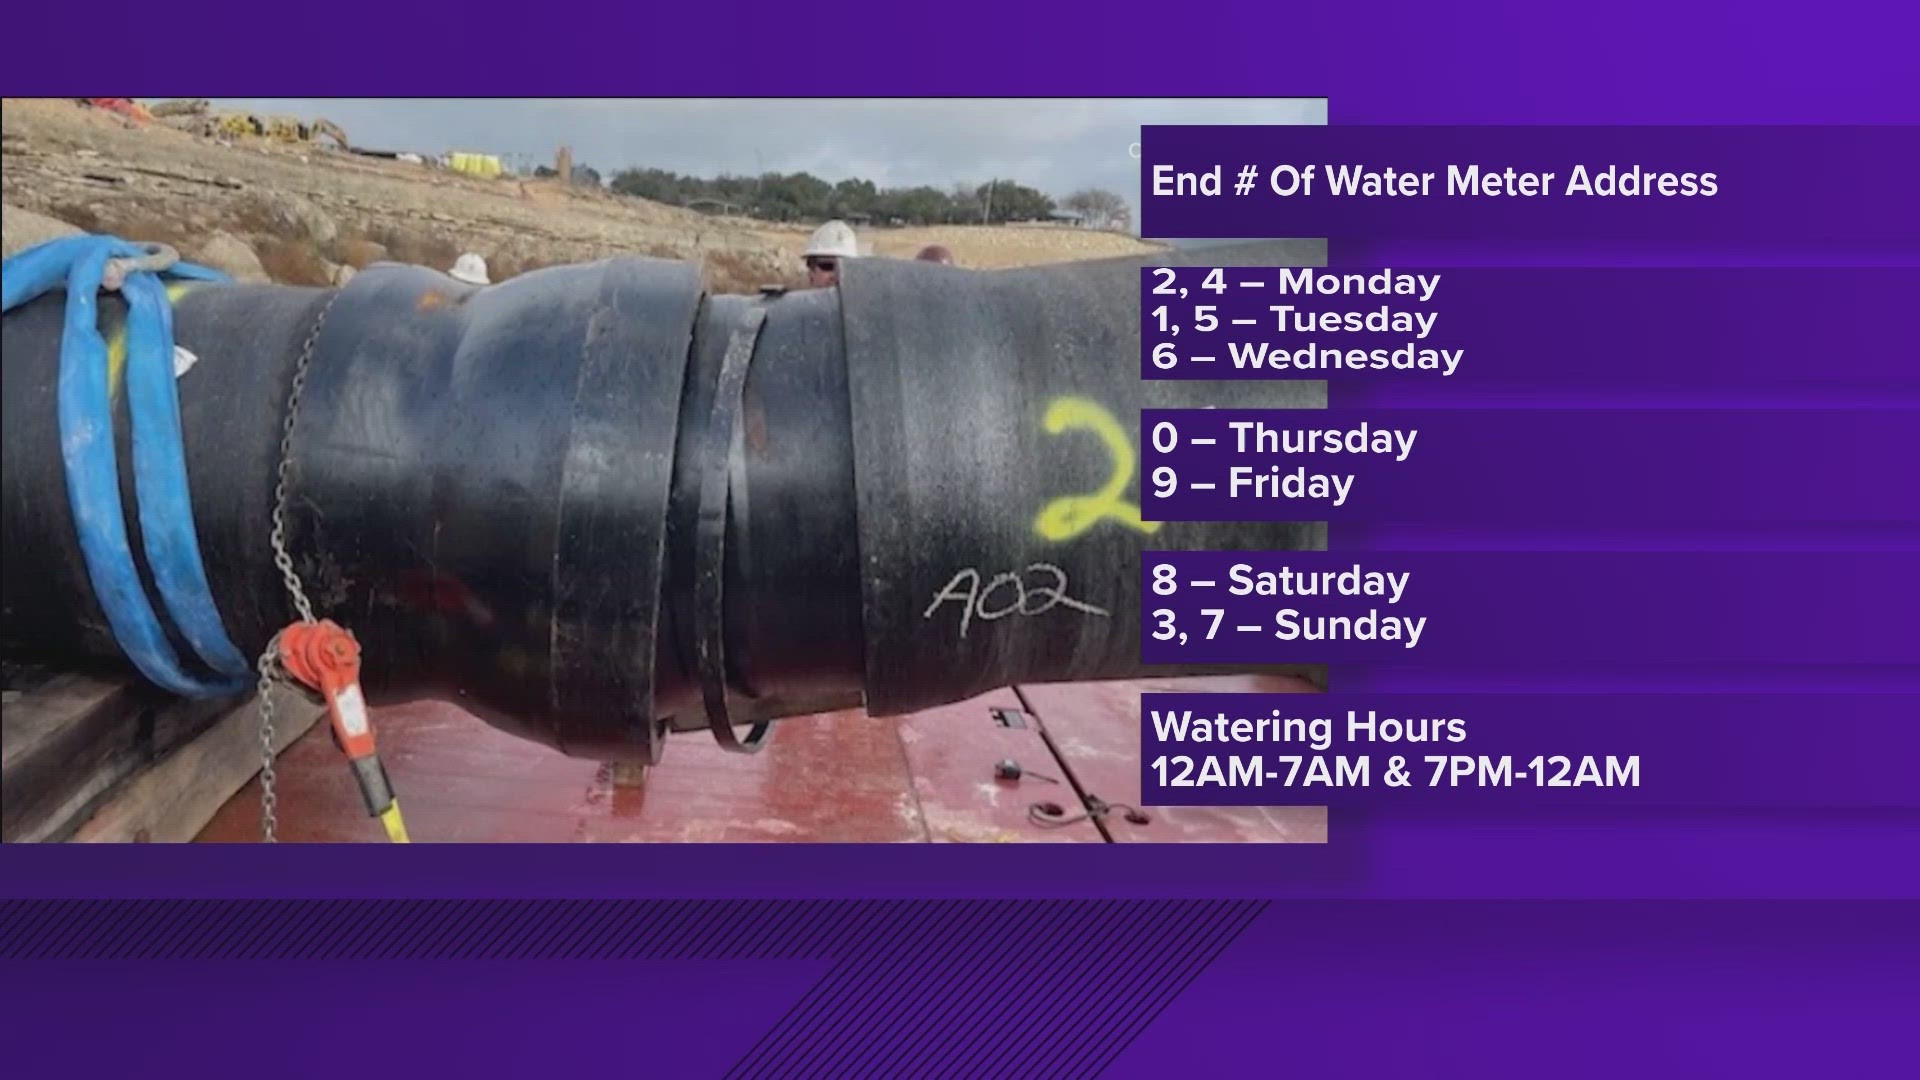 The city of Leander is now under Phase 2 water restrictions.